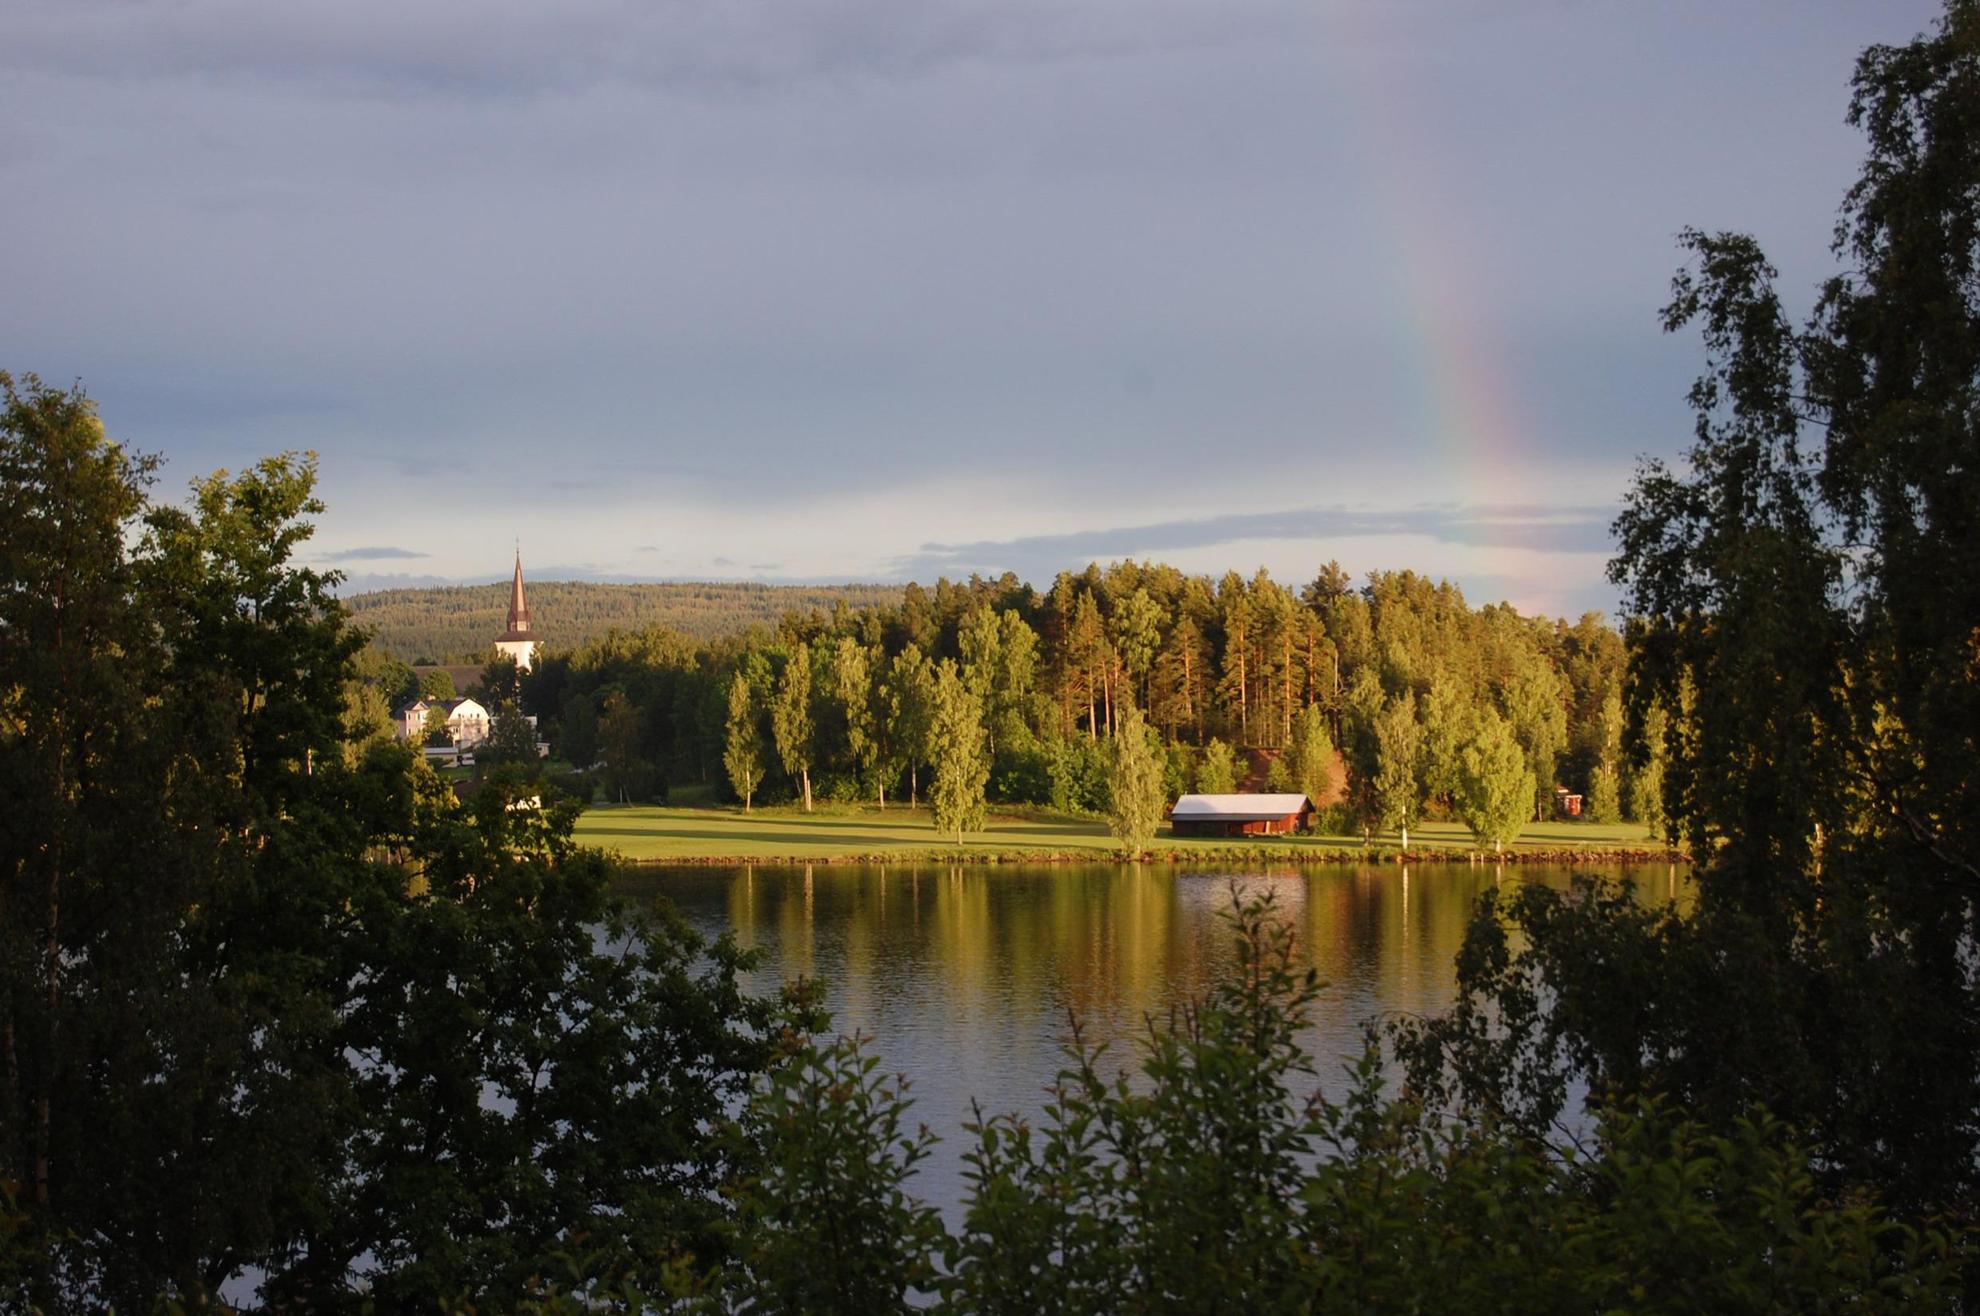 Looking across Lake Fryken is a rainbow, forest, a church steeple and a barn.